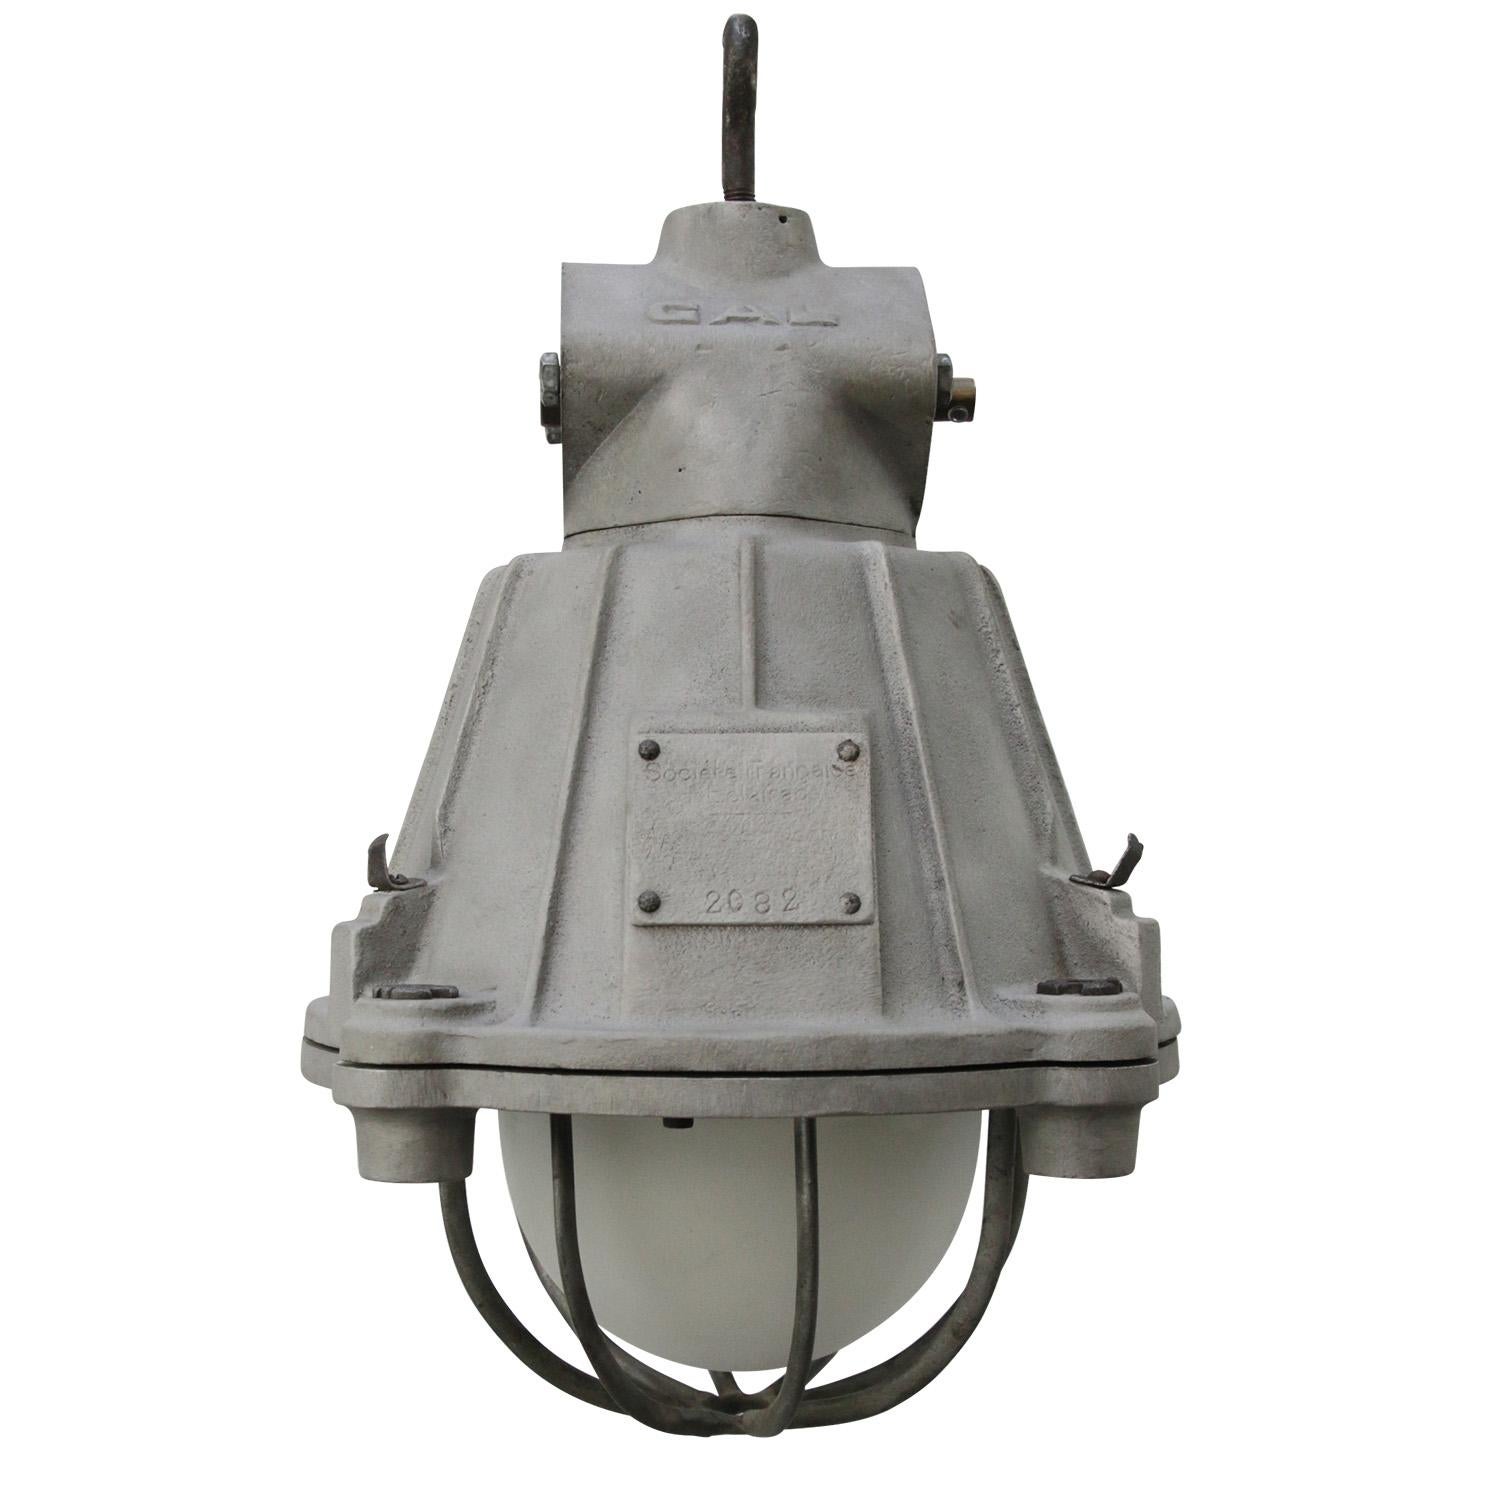 Industrial hanging lamp by GAL, France.
Cast aluminium with frosted glass

Weight 6.70 kg / 14.8 lb

Priced per individual item. All lamps have been made suitable by international standards for incandescent light bulbs, energy-efficient and LED